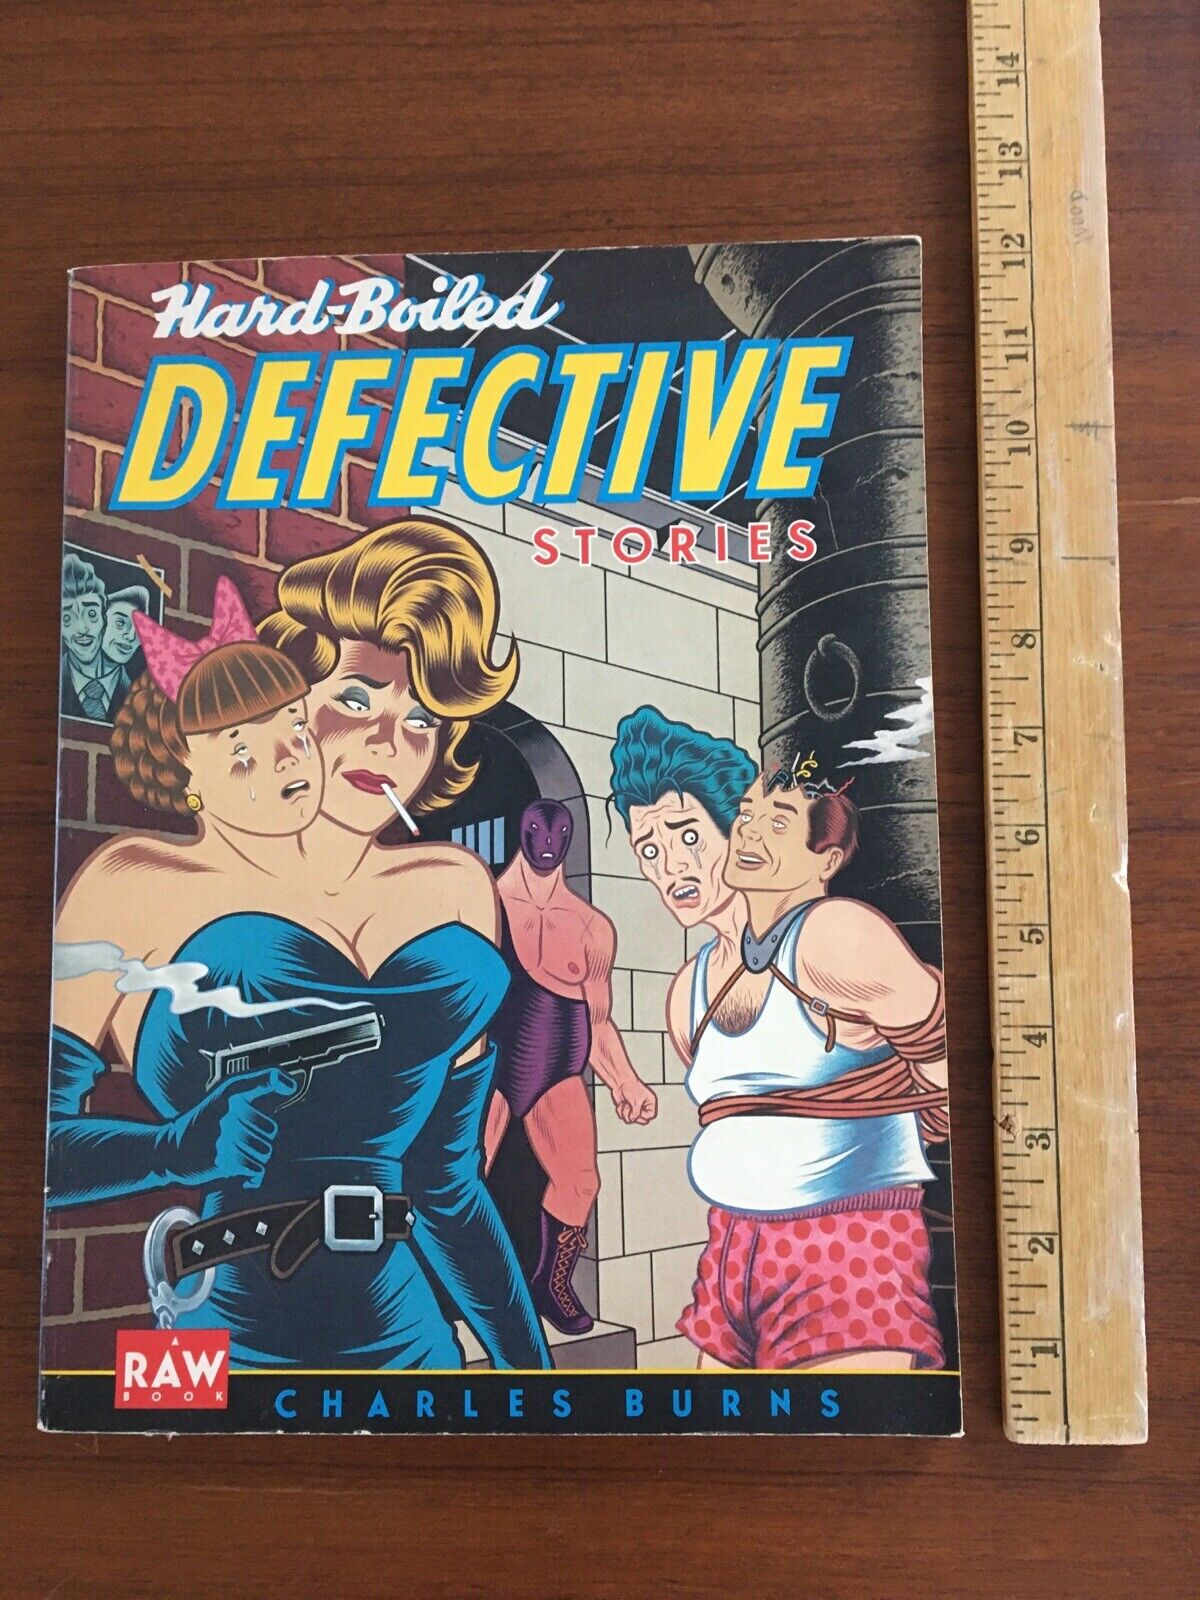 Hard-Boiled Defective Stories; 1988; Pantheon/Raw Book